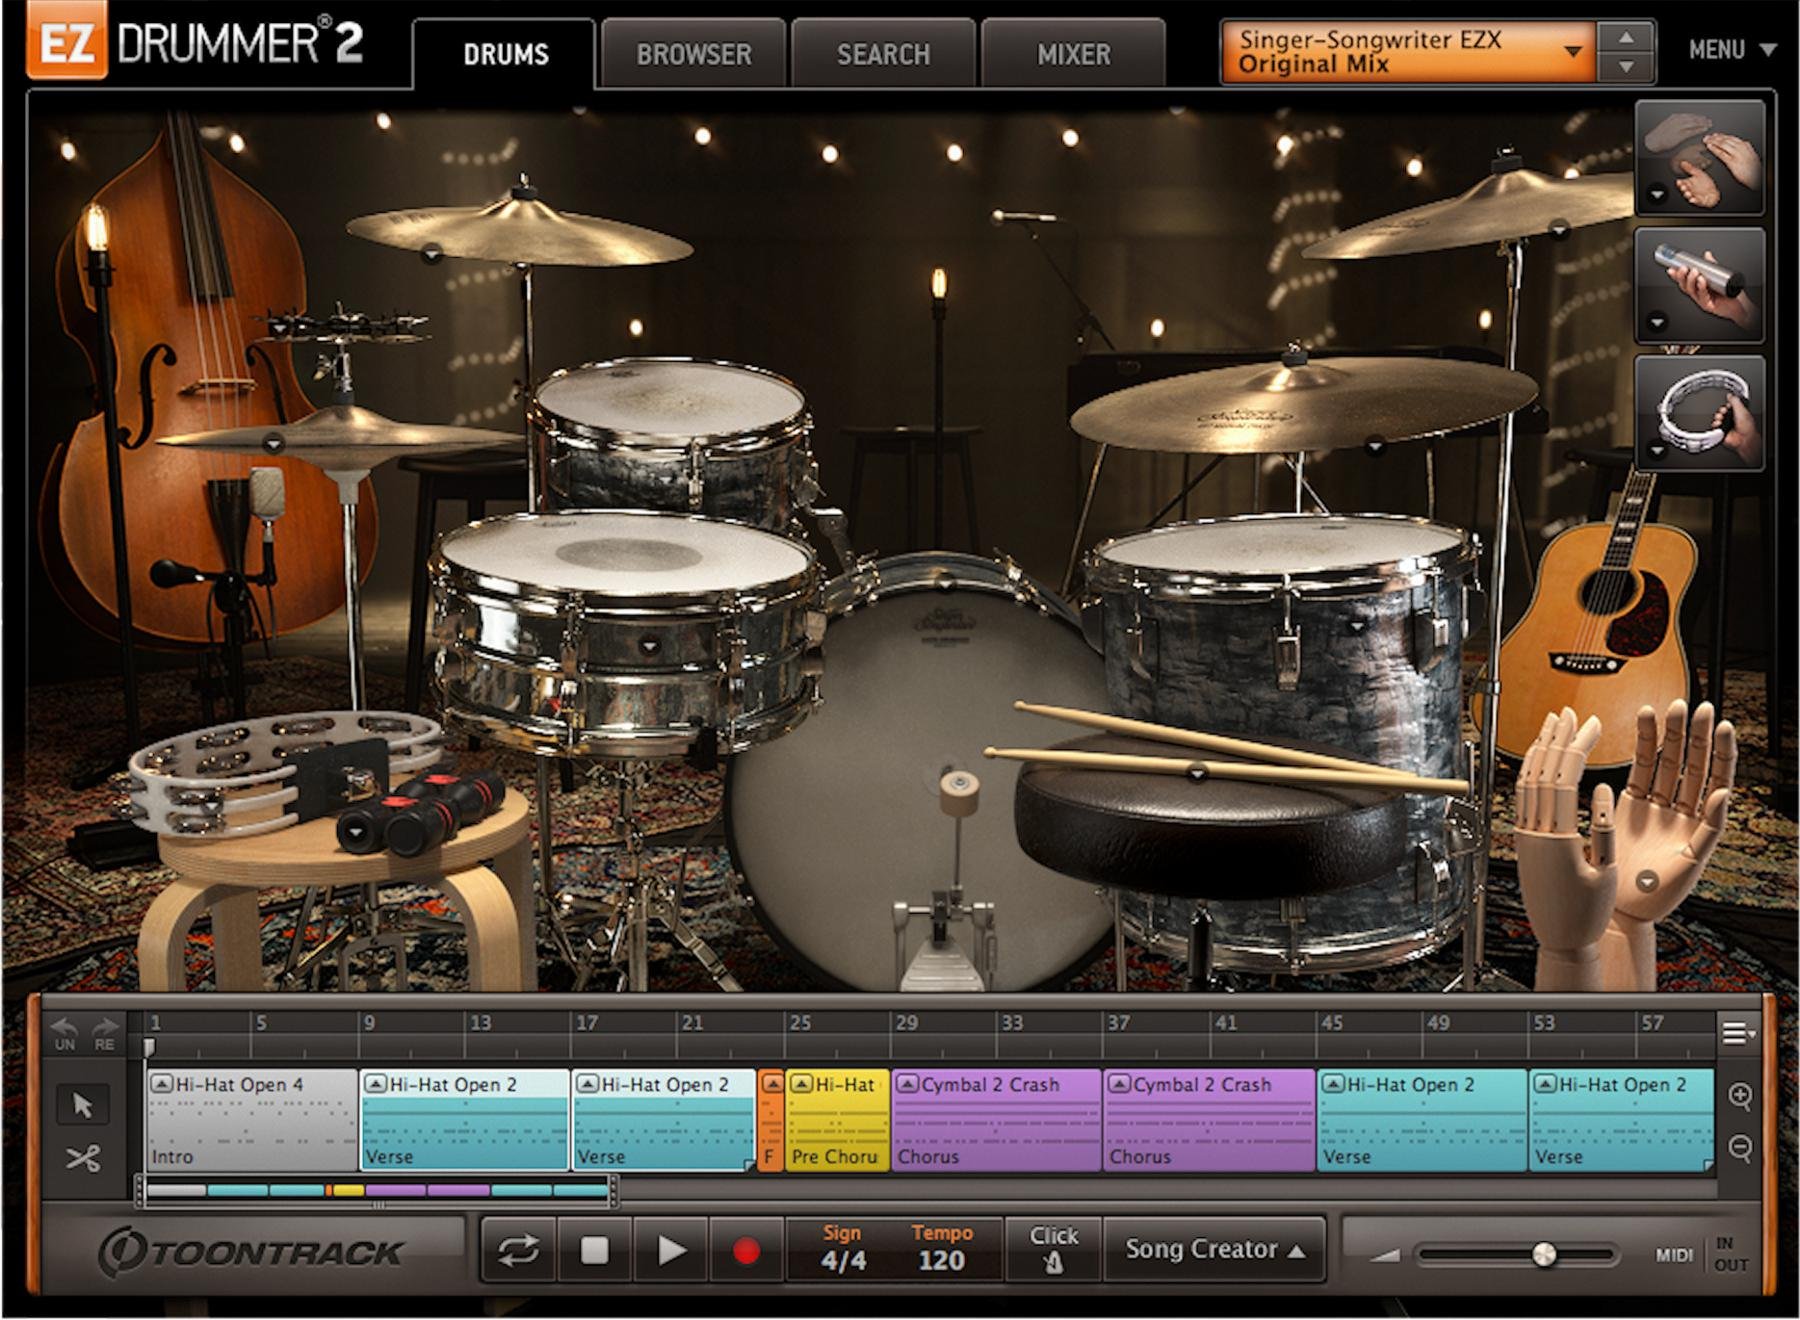 ezdrummer 2 all expansions with updates